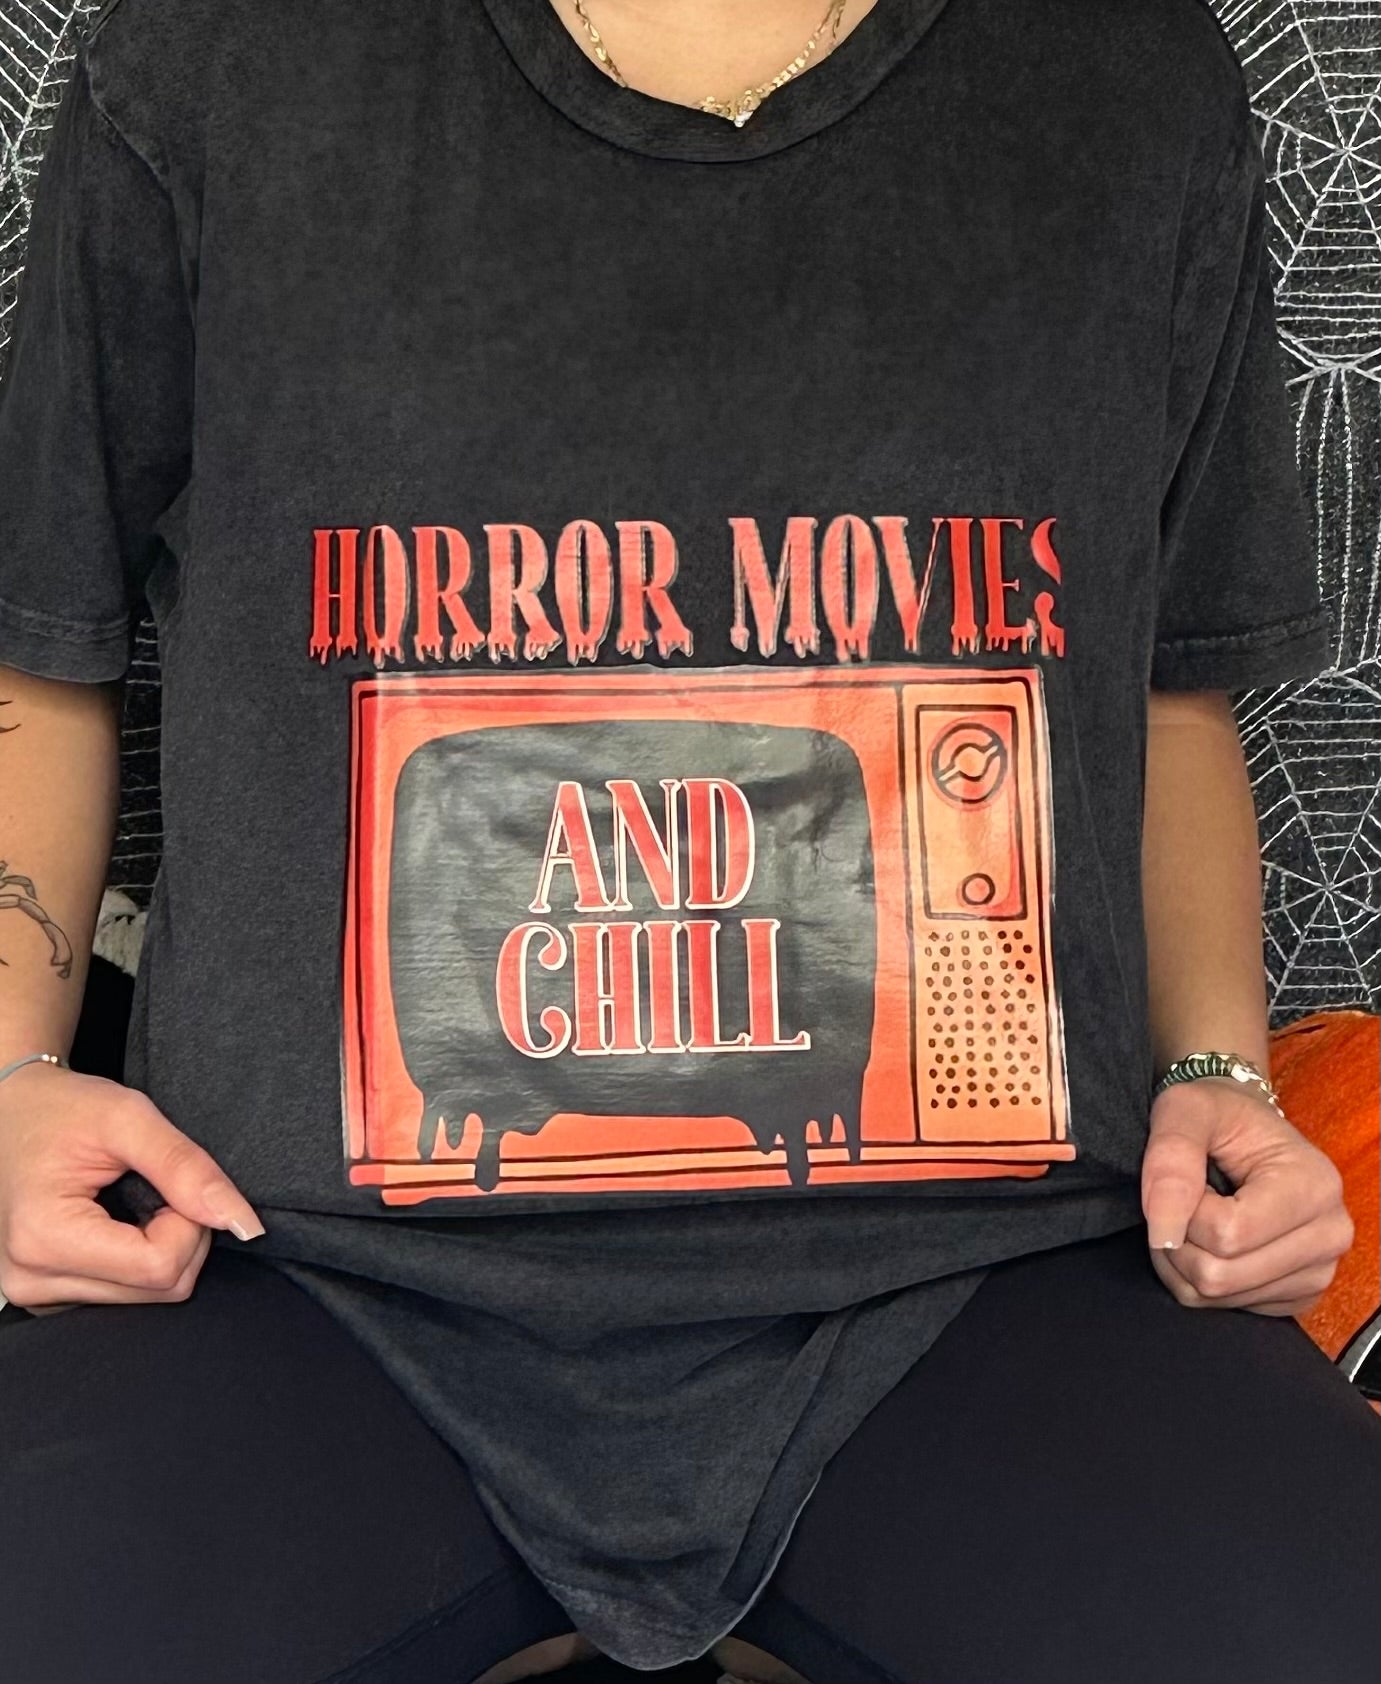 Horror Movies & Chill Tee